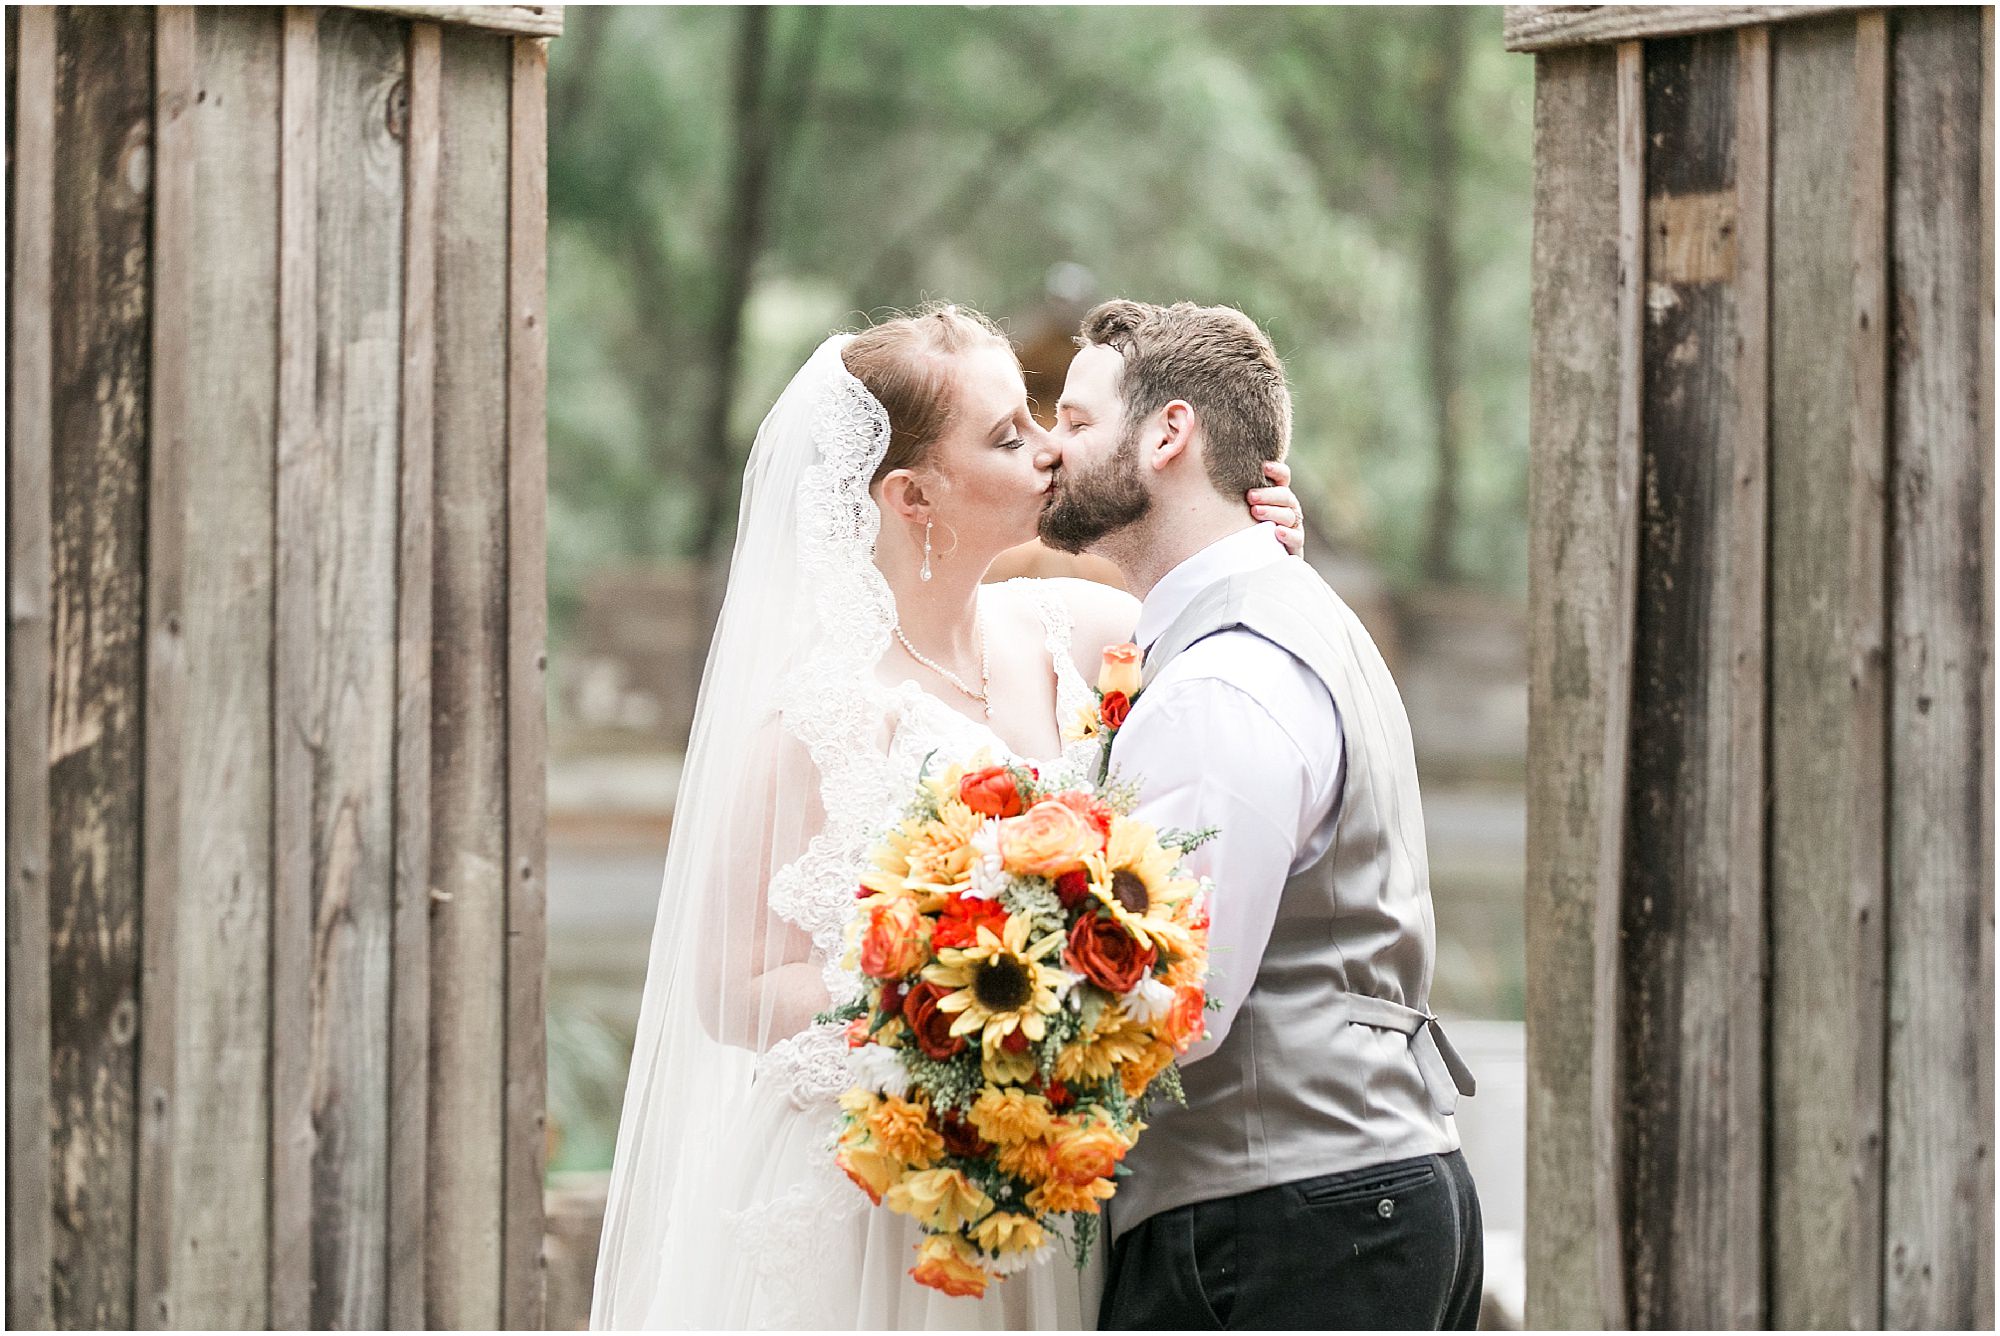 Bride and groom kissing by a wooden fence.